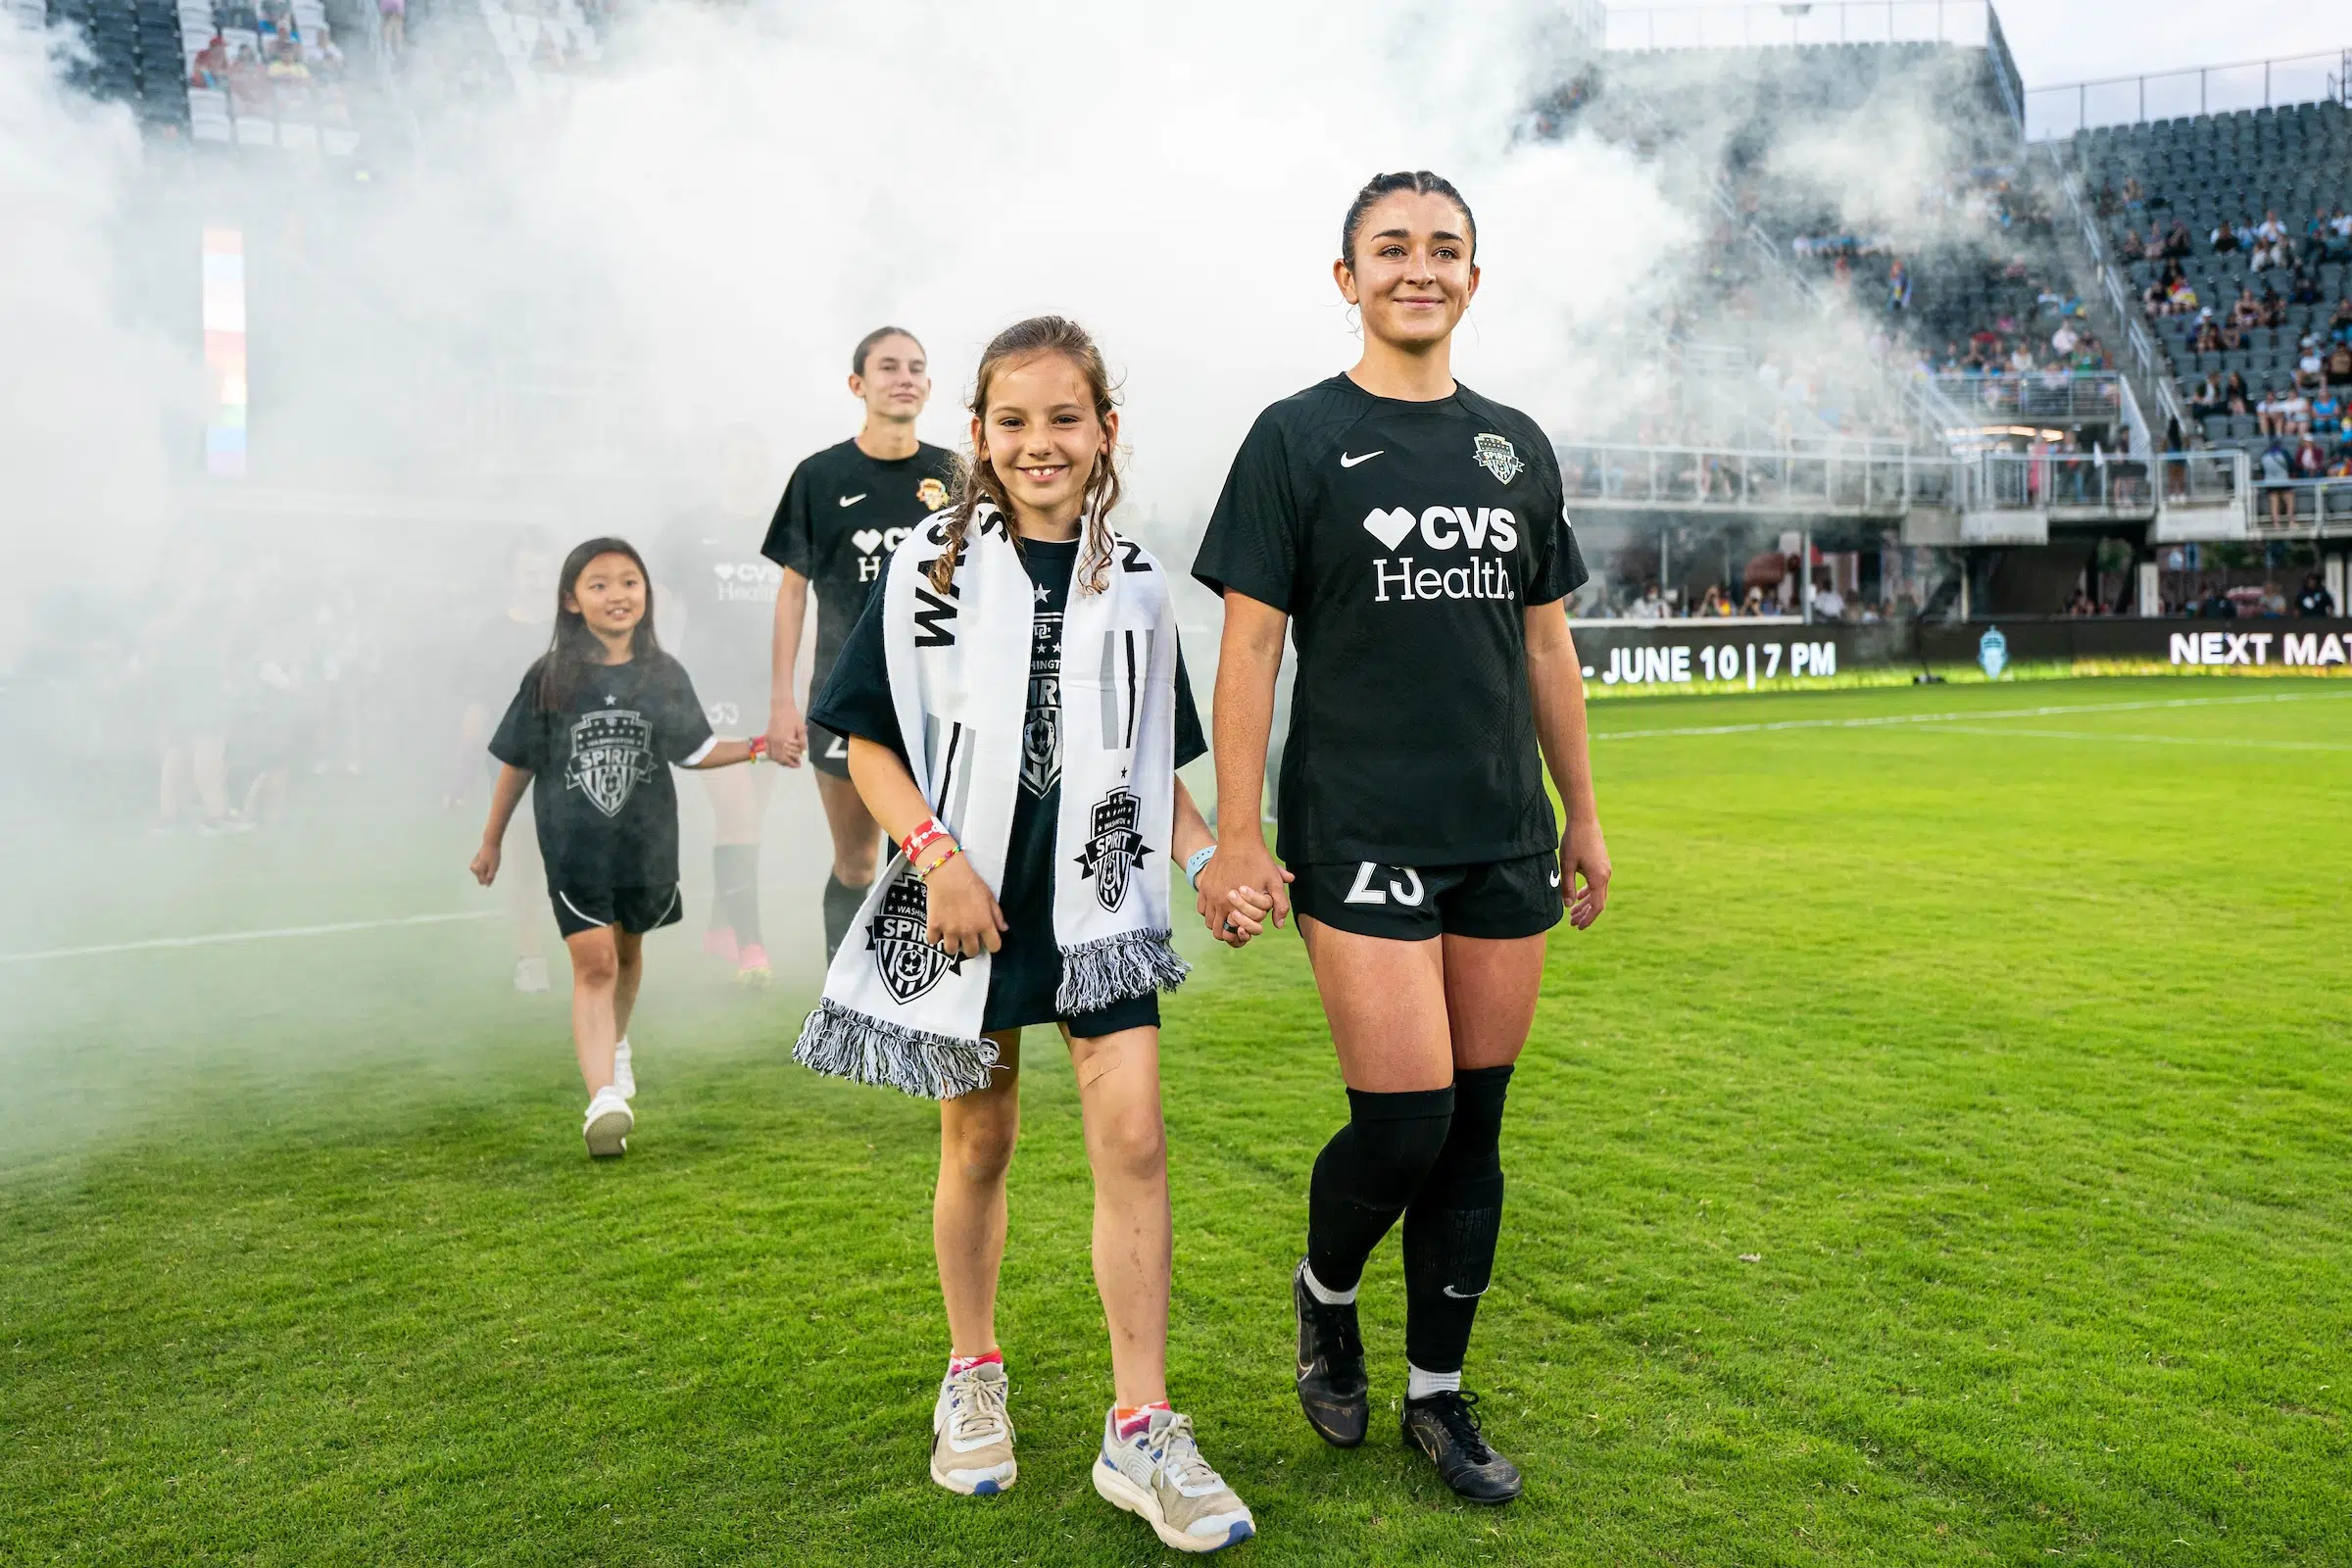 Marissa Sheva in an all black uniforms walks out of the tunnel onto the soccer field holding hands with a young fan who is wearing a Washington Spirit scarf. Behind them, smoke machines fill the air.